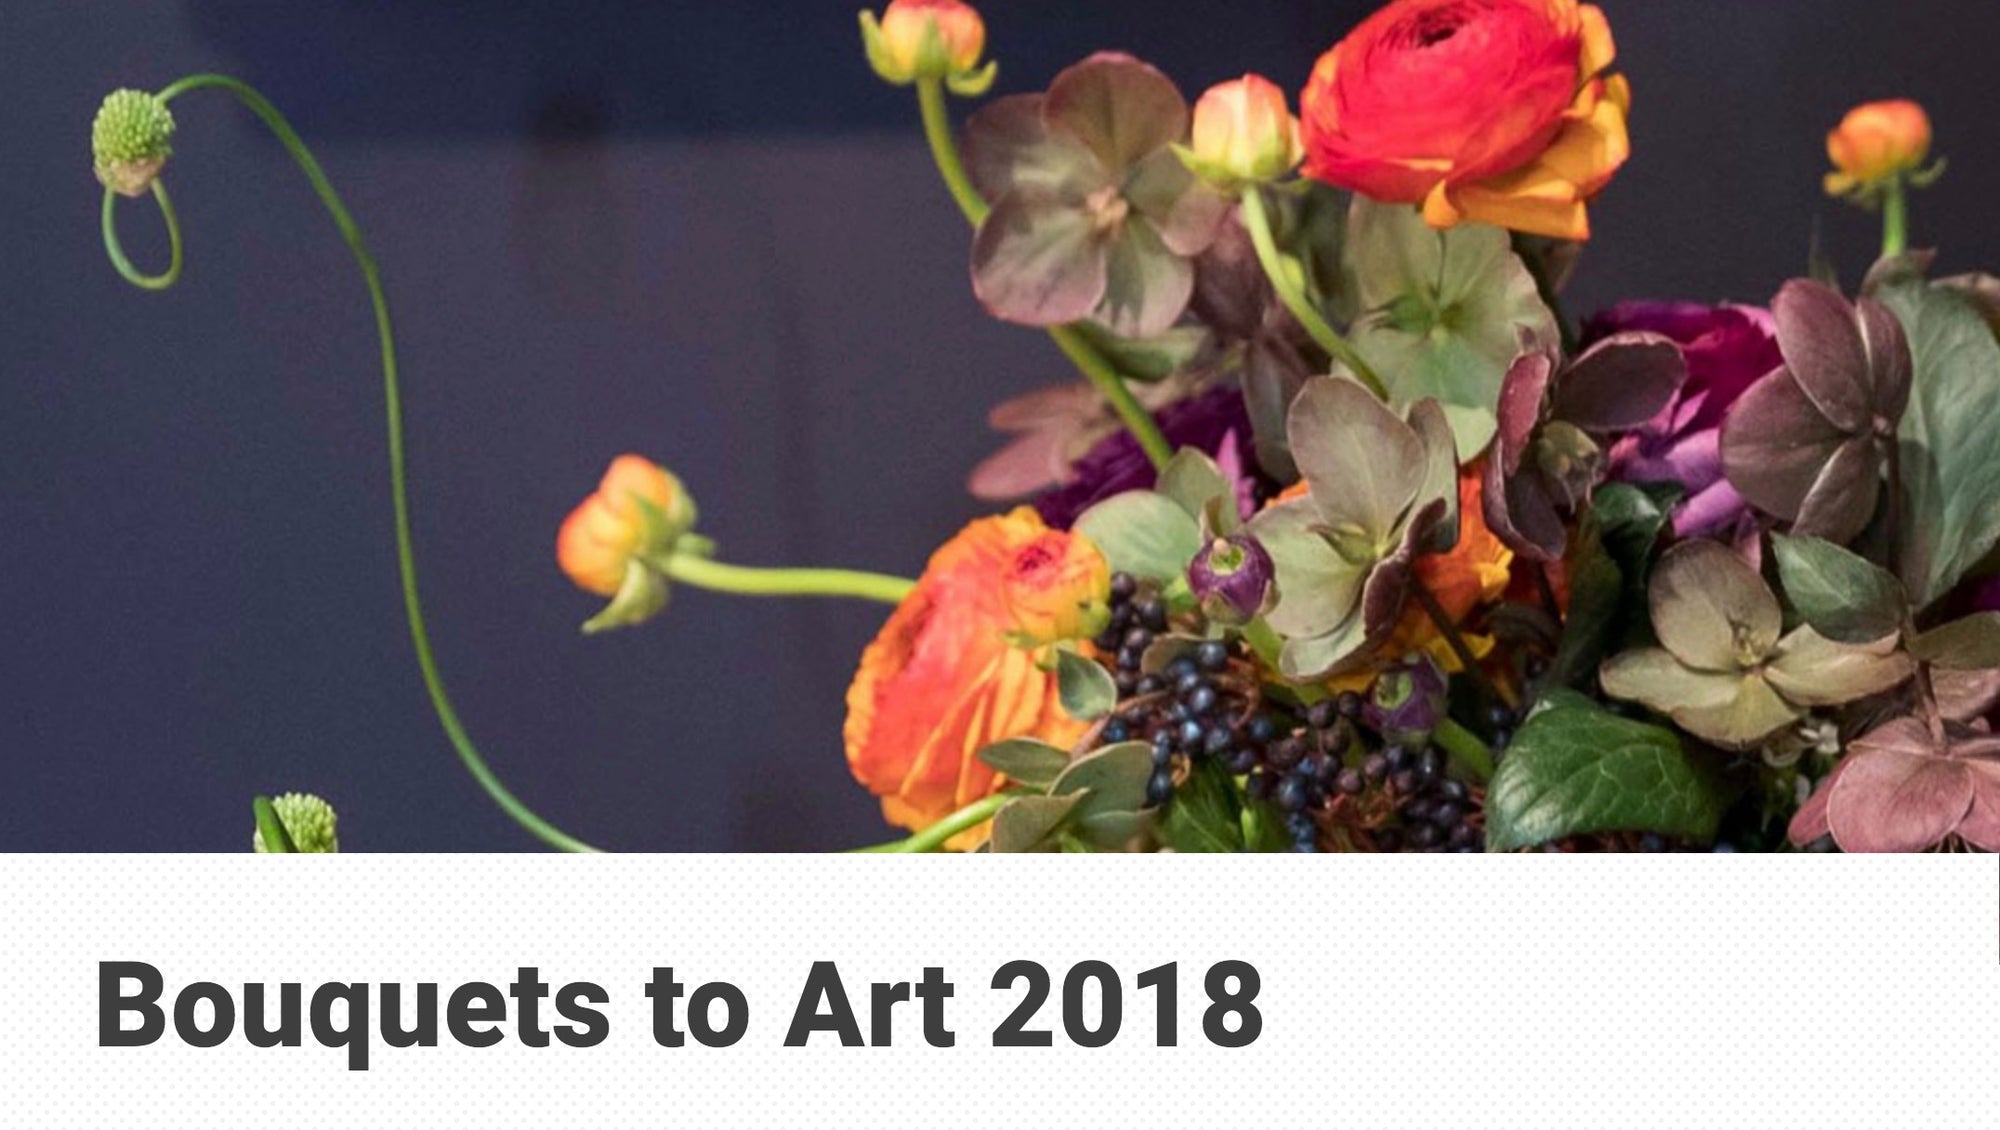 Bouquets to Art 2018 at the deYoung Museum